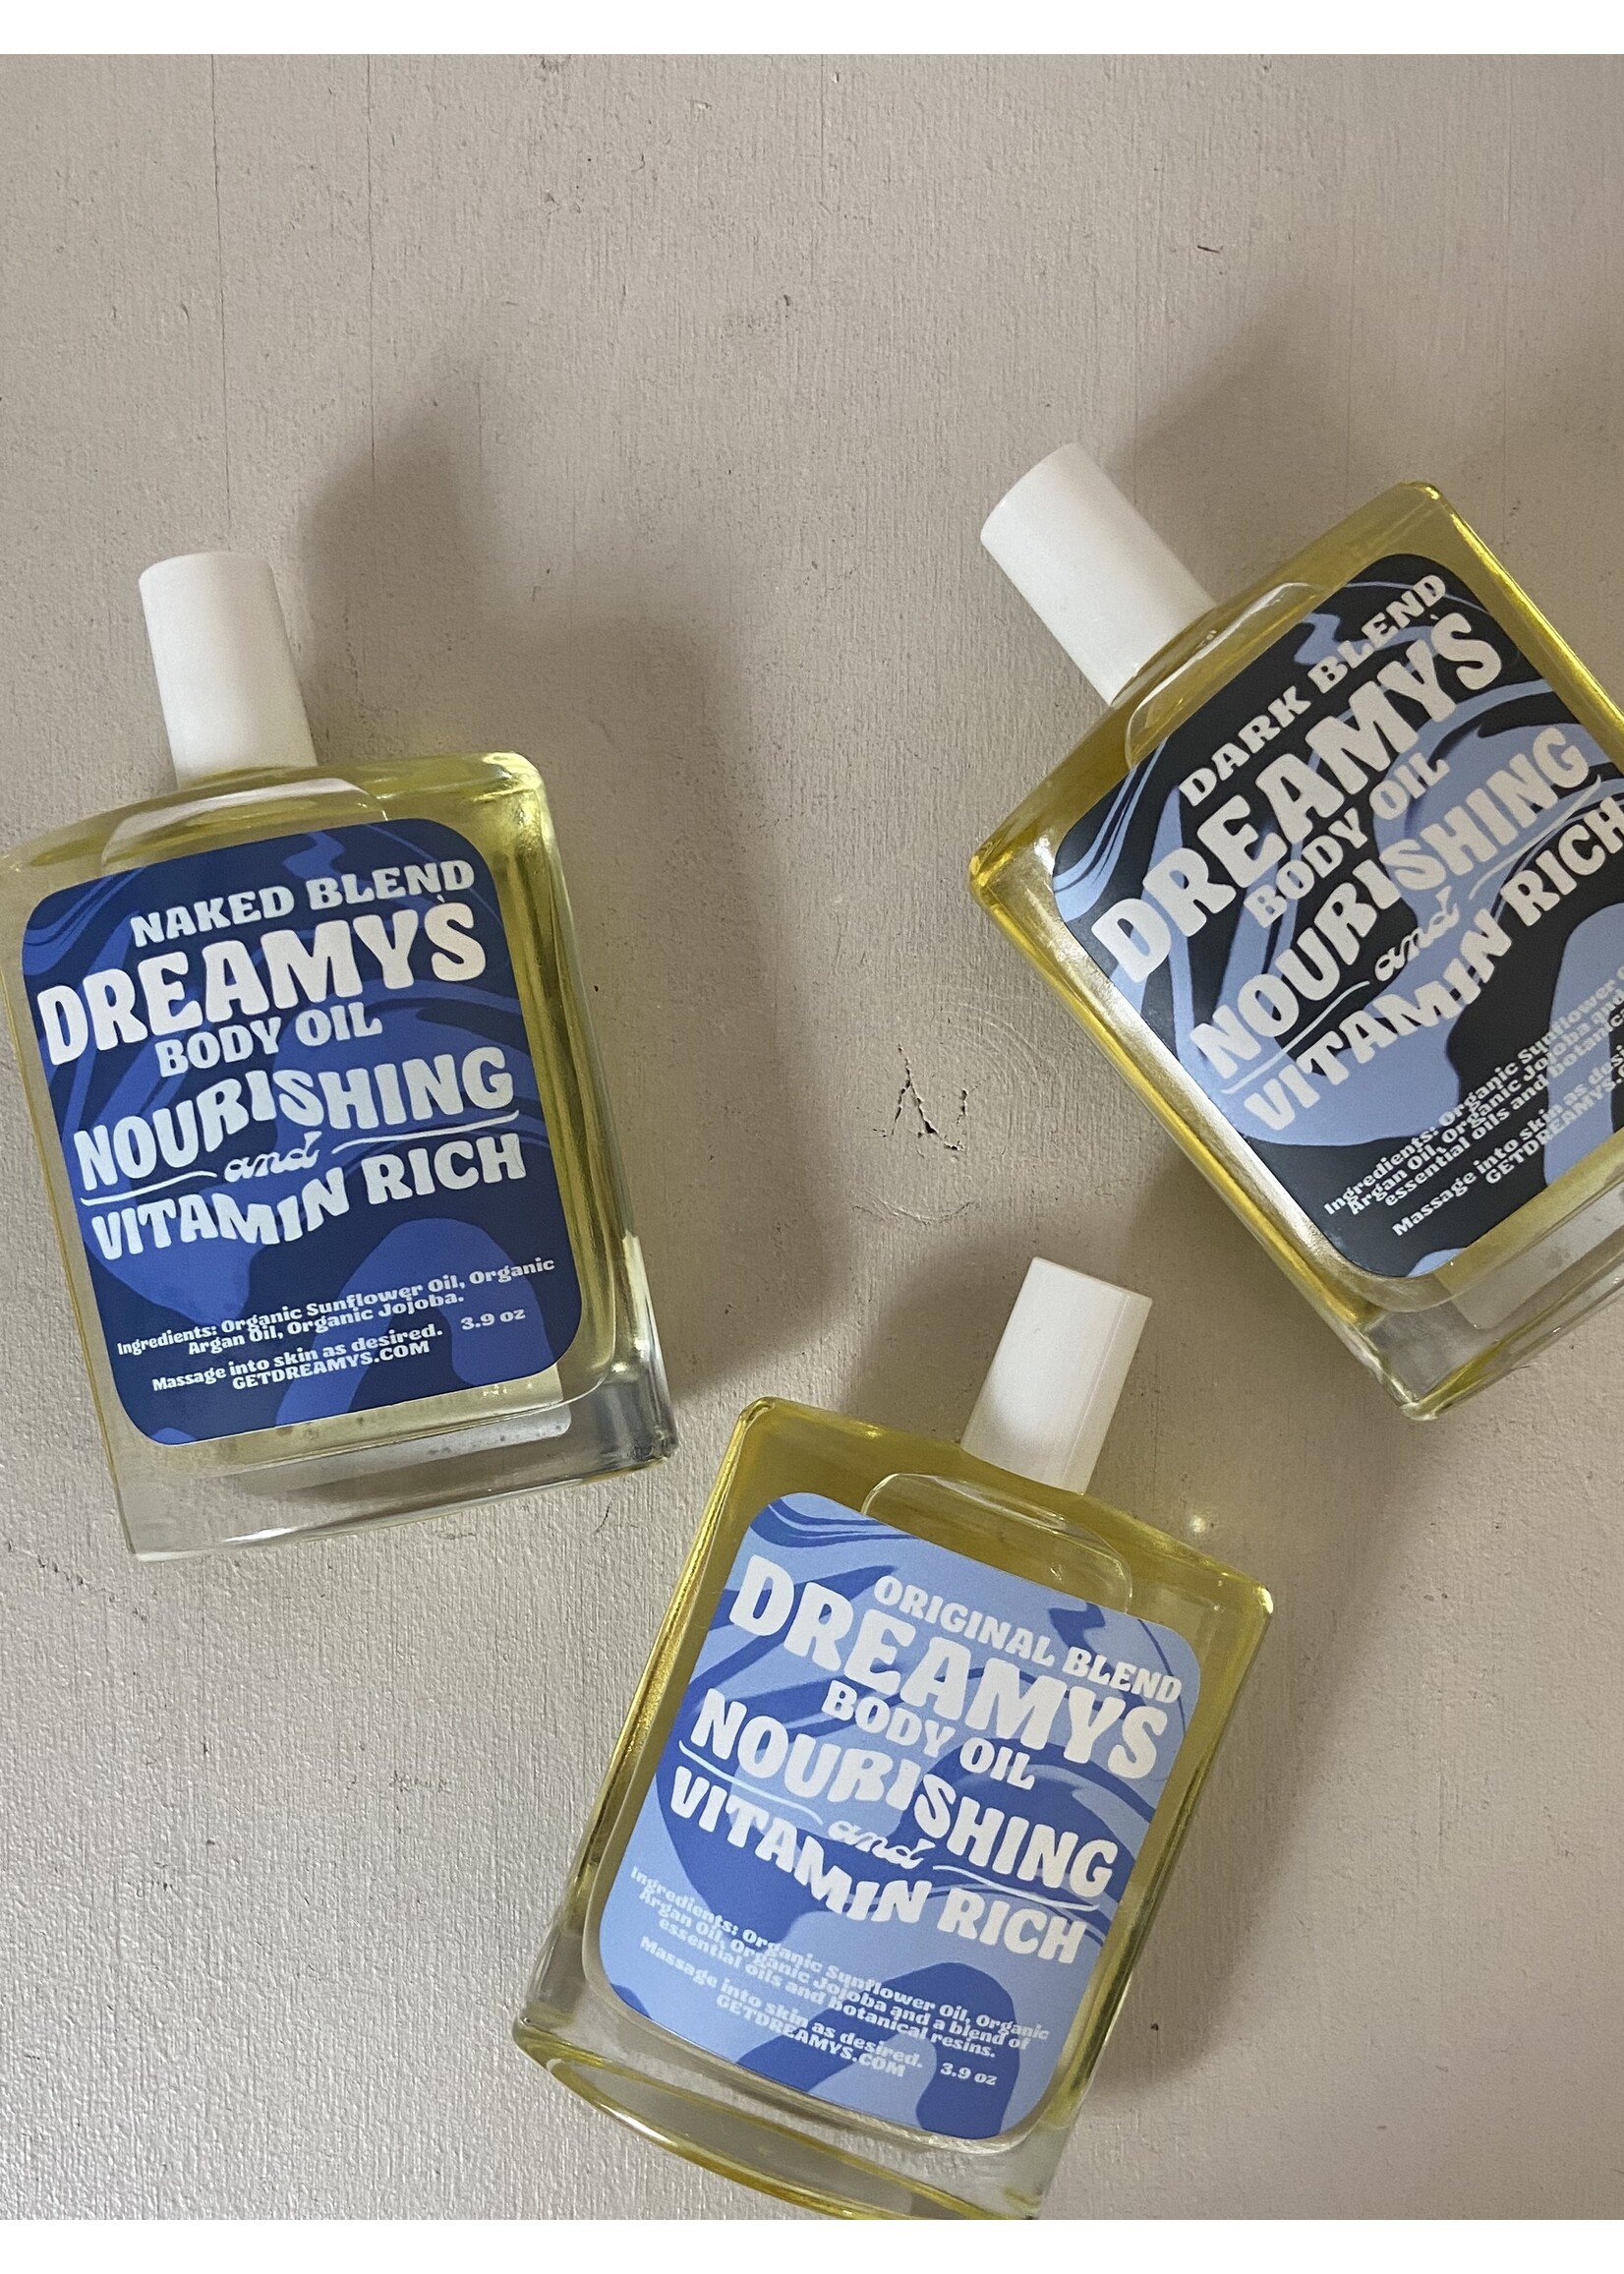 Wild Yonder Botanicals Huiles pour corps "Dreamys" par Wild Yonder Botanicals